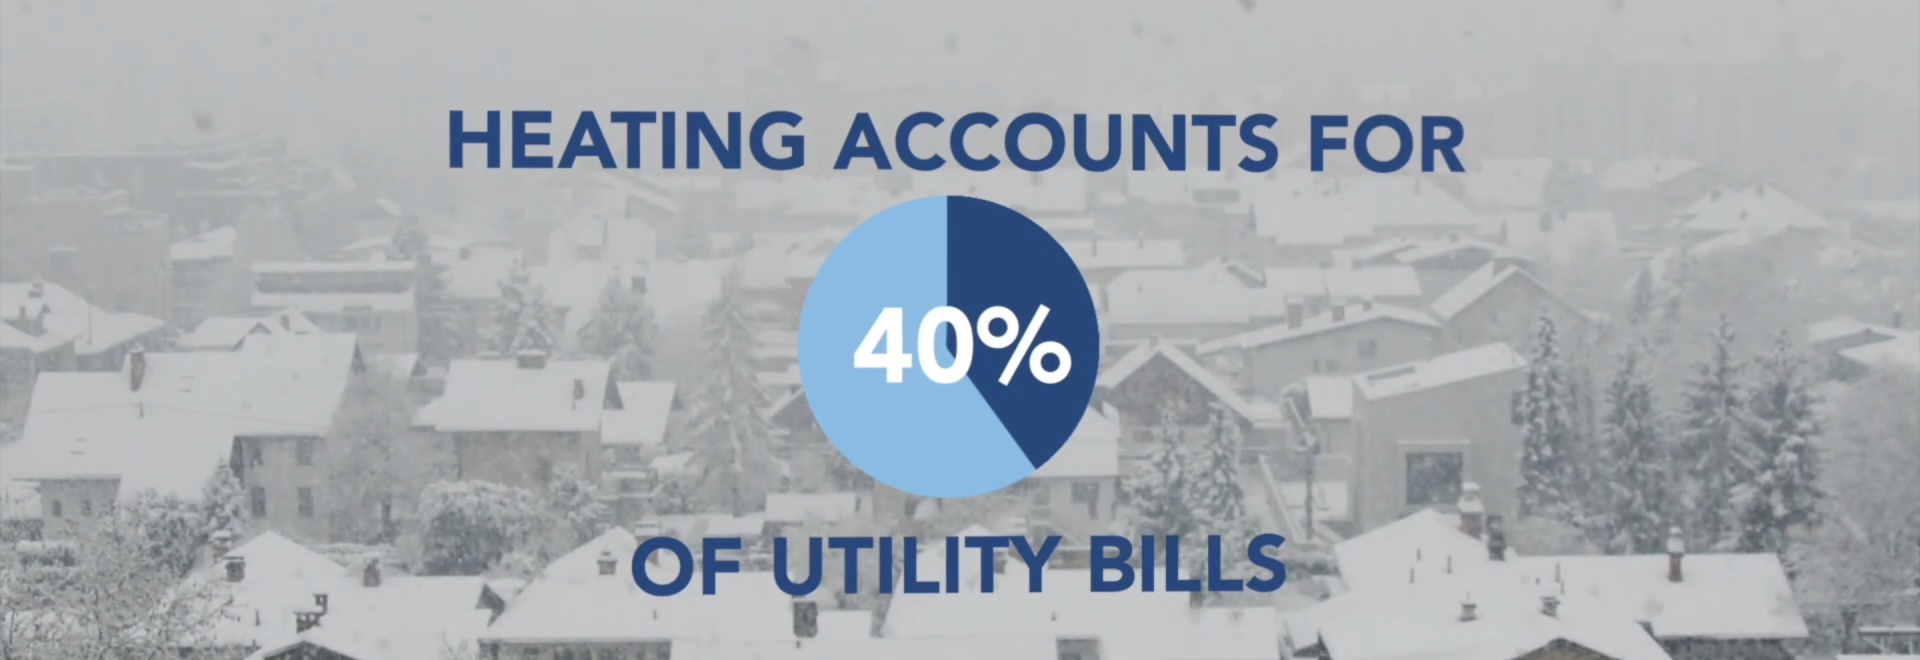 heating accounts for 40% of utility bills image